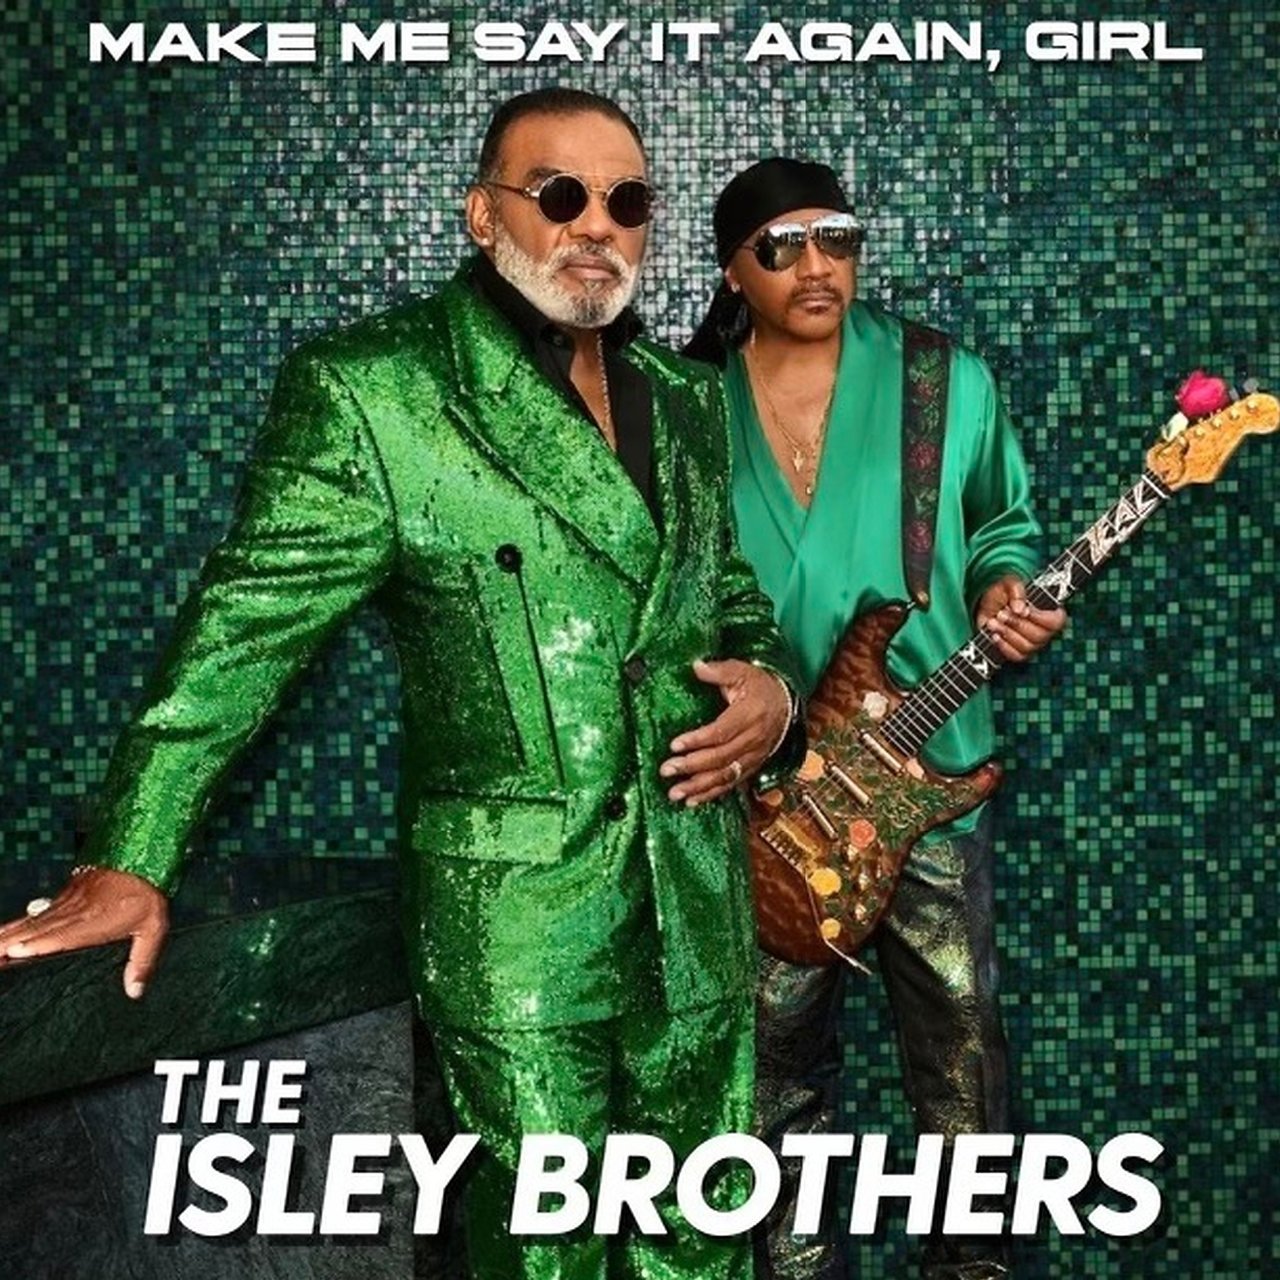 The Isley Brothers featuring 2 Chainz — The Plug cover artwork